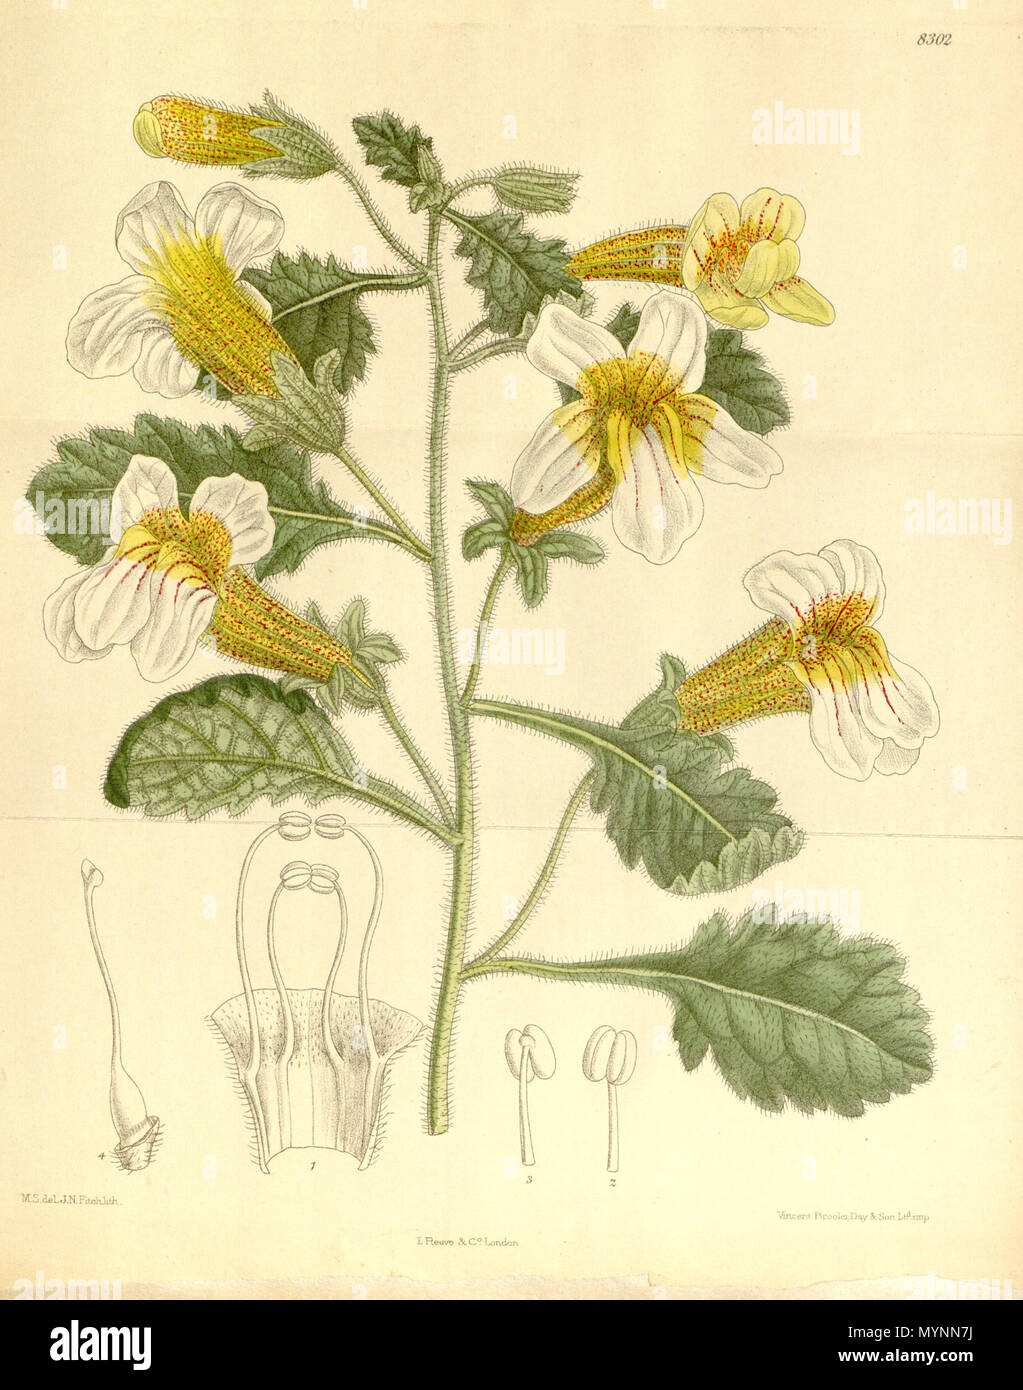 . Rehmannia henryi, Orobanchaceae . 1910. M.S. del., J.N.Fitch lith. 449 Rehmannia henryi 136-8302 Stock Photo